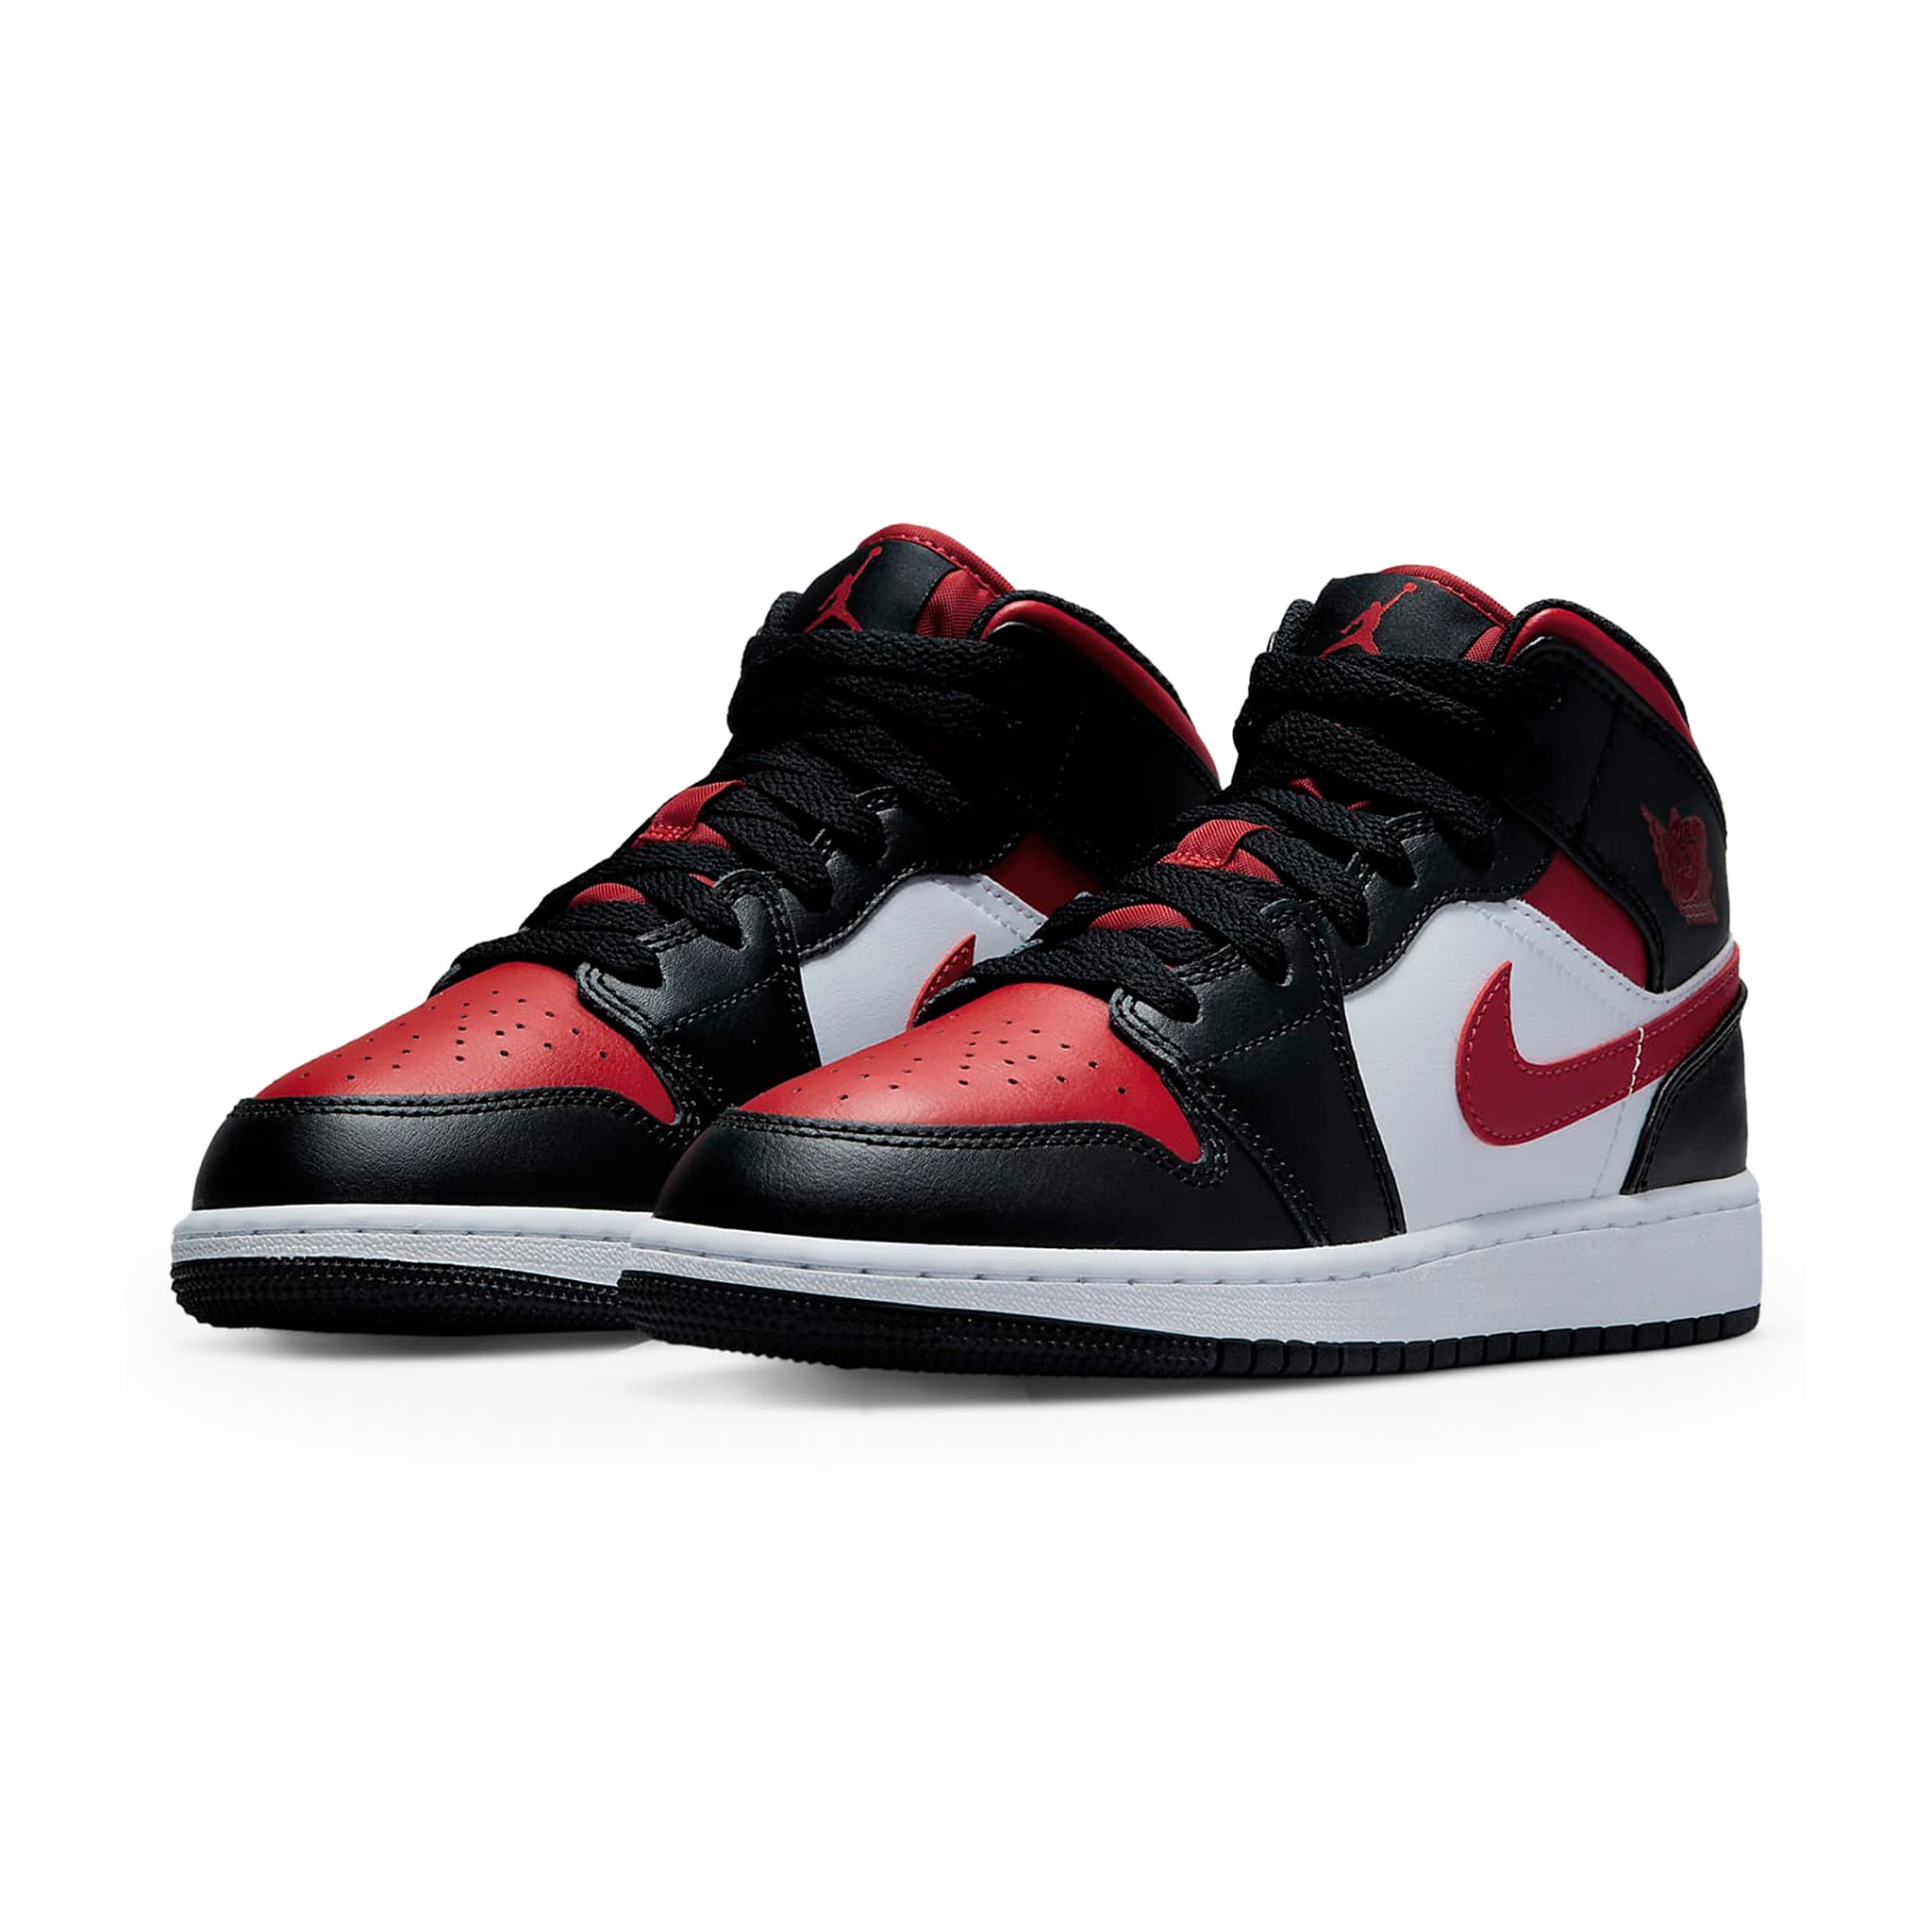 Front side view of Air Jordan 1 Mid Black Fire Red (GS) 554725-079